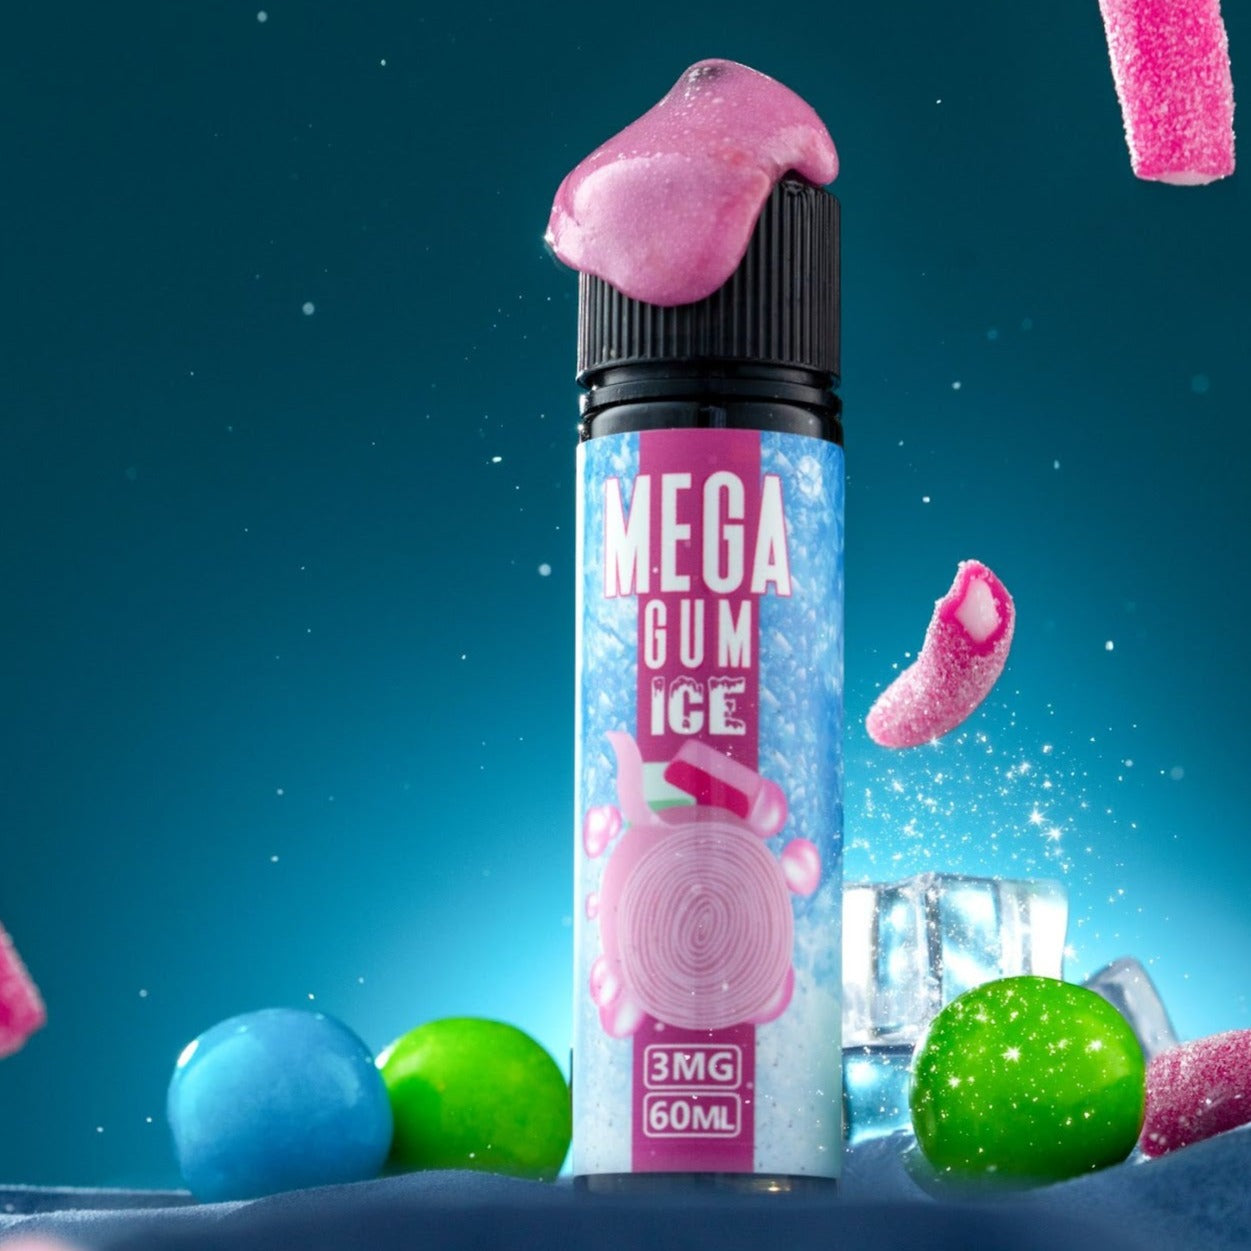 GRAND Mega Gum Ice - Refreshing gum with a twist of icy coolness, a unique vaping experience.